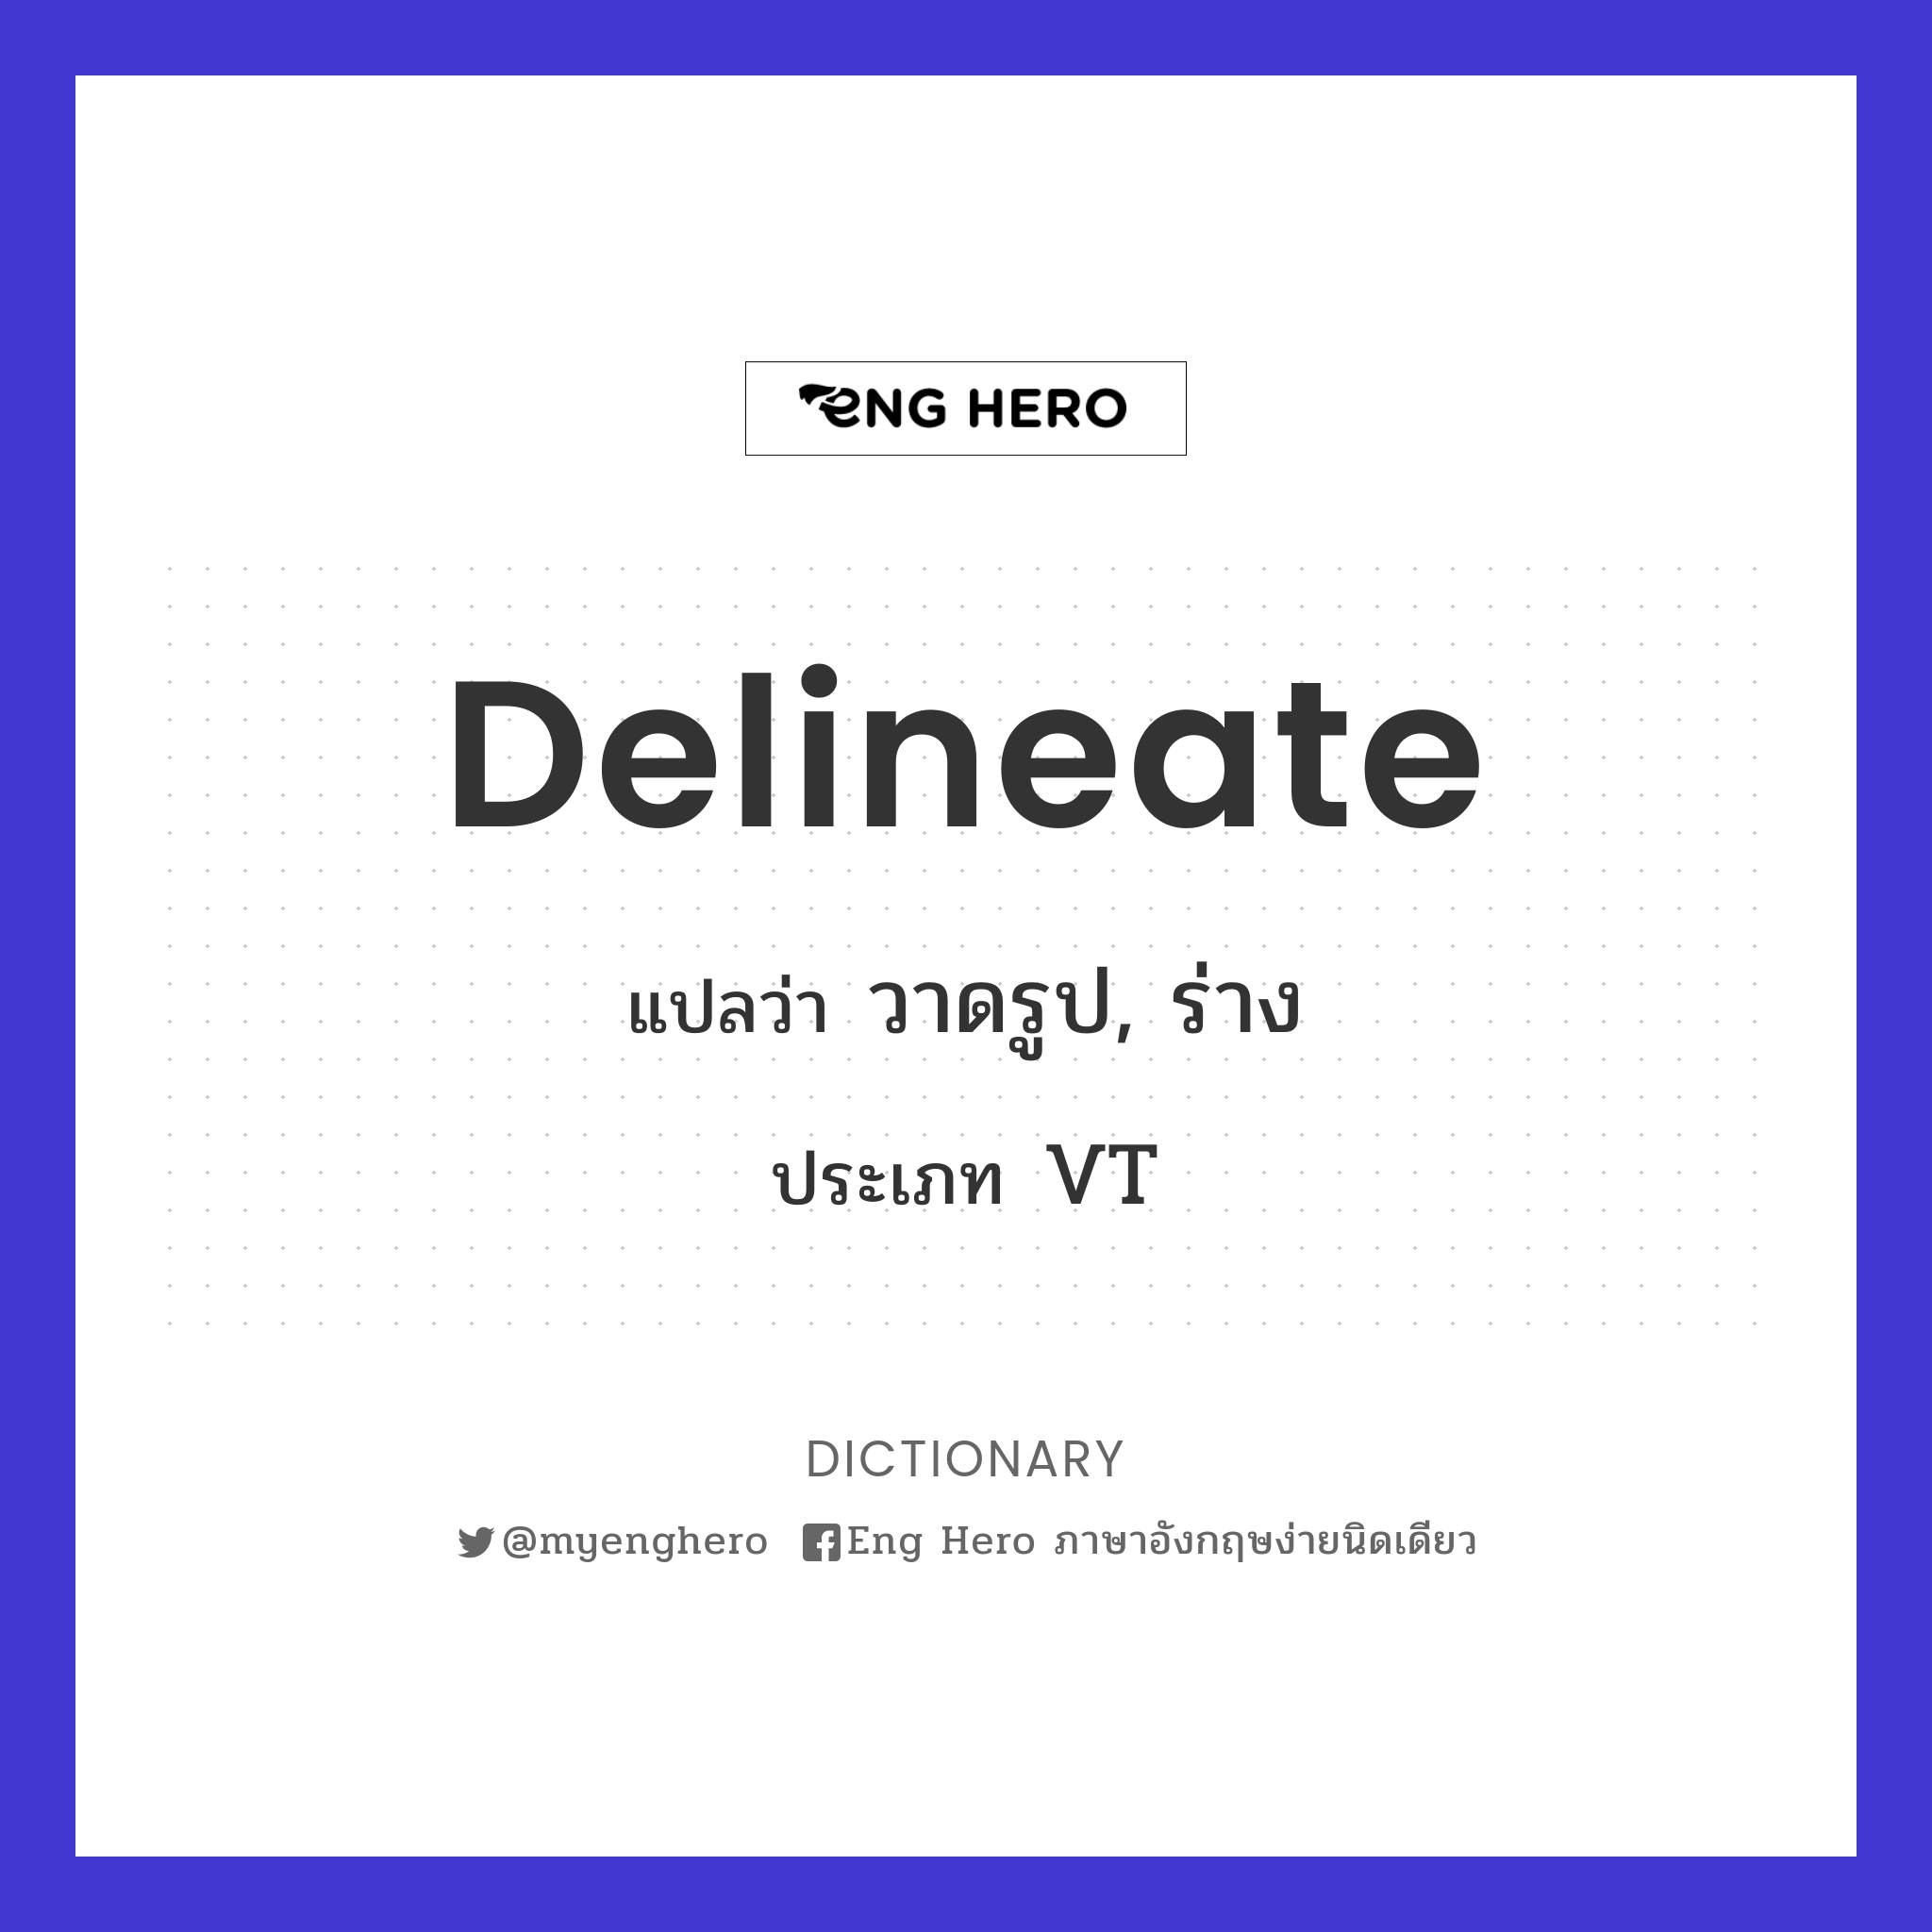 delineate